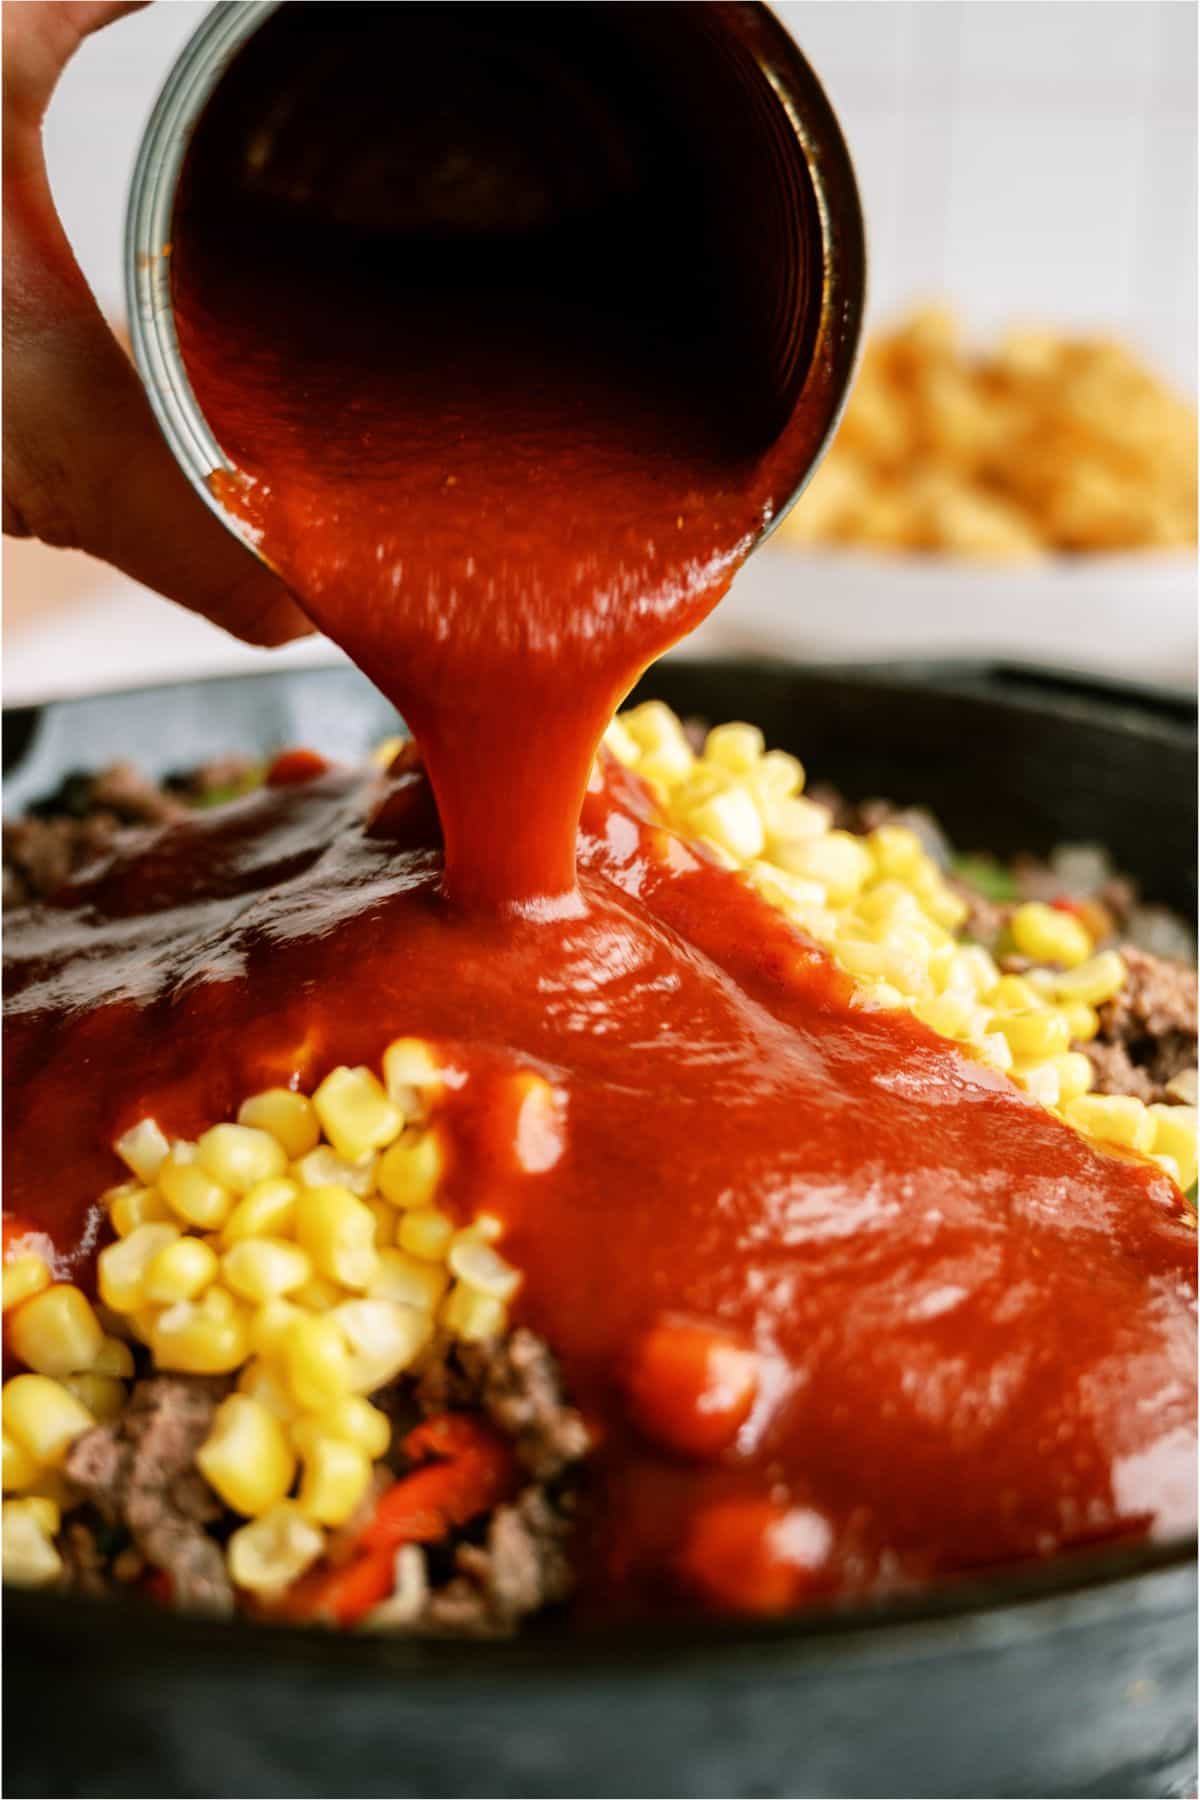 Pouring manwich sauce on top of ground beef mixture in skillet